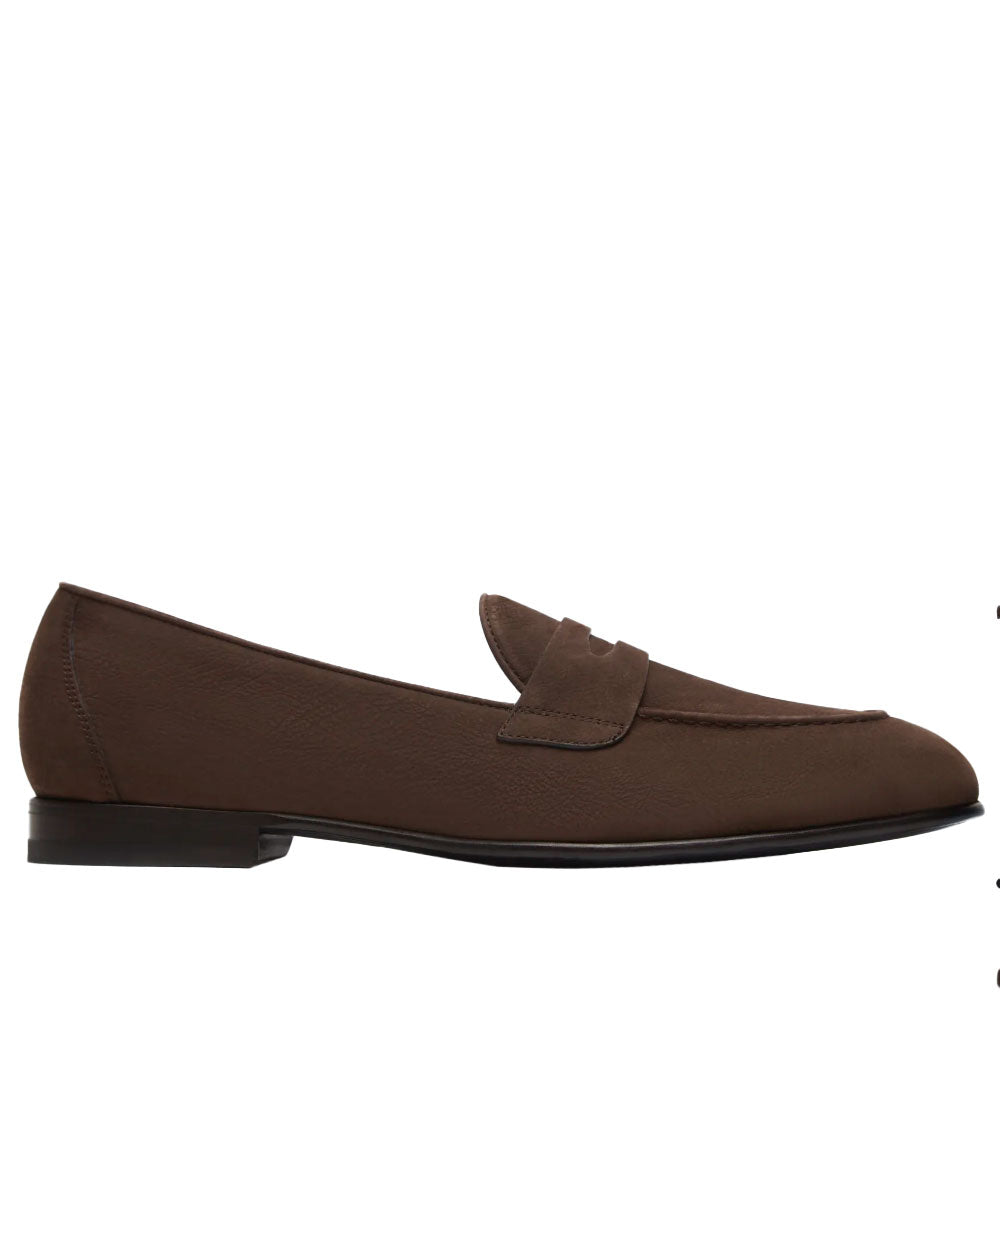 Nabuk Casual Penny Loafer in Coffee